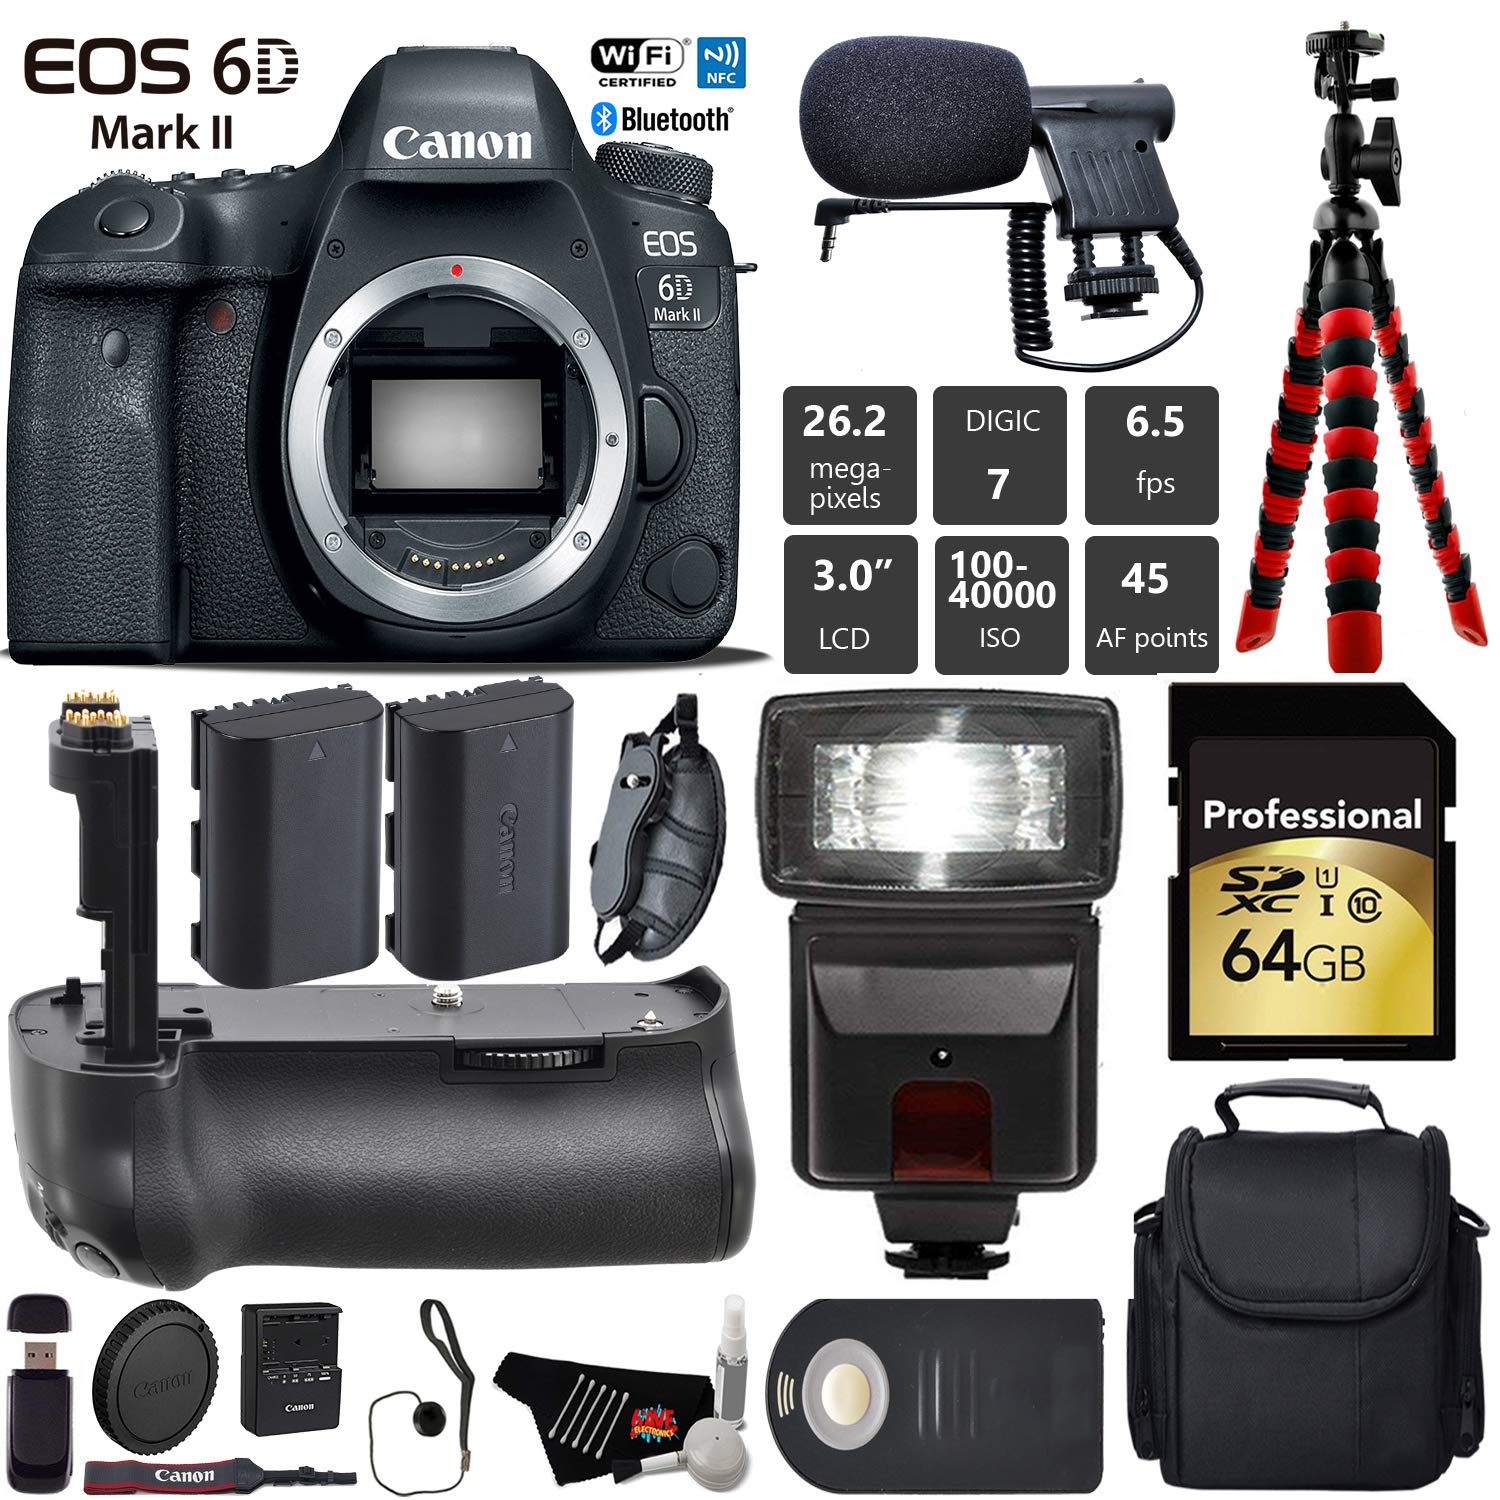 Canon EOS 6D Mark II DSLR Camera (Body Only) + Professional Battery Grip + Condenser Microphone + Flash + Extra Battery Pro Bundle